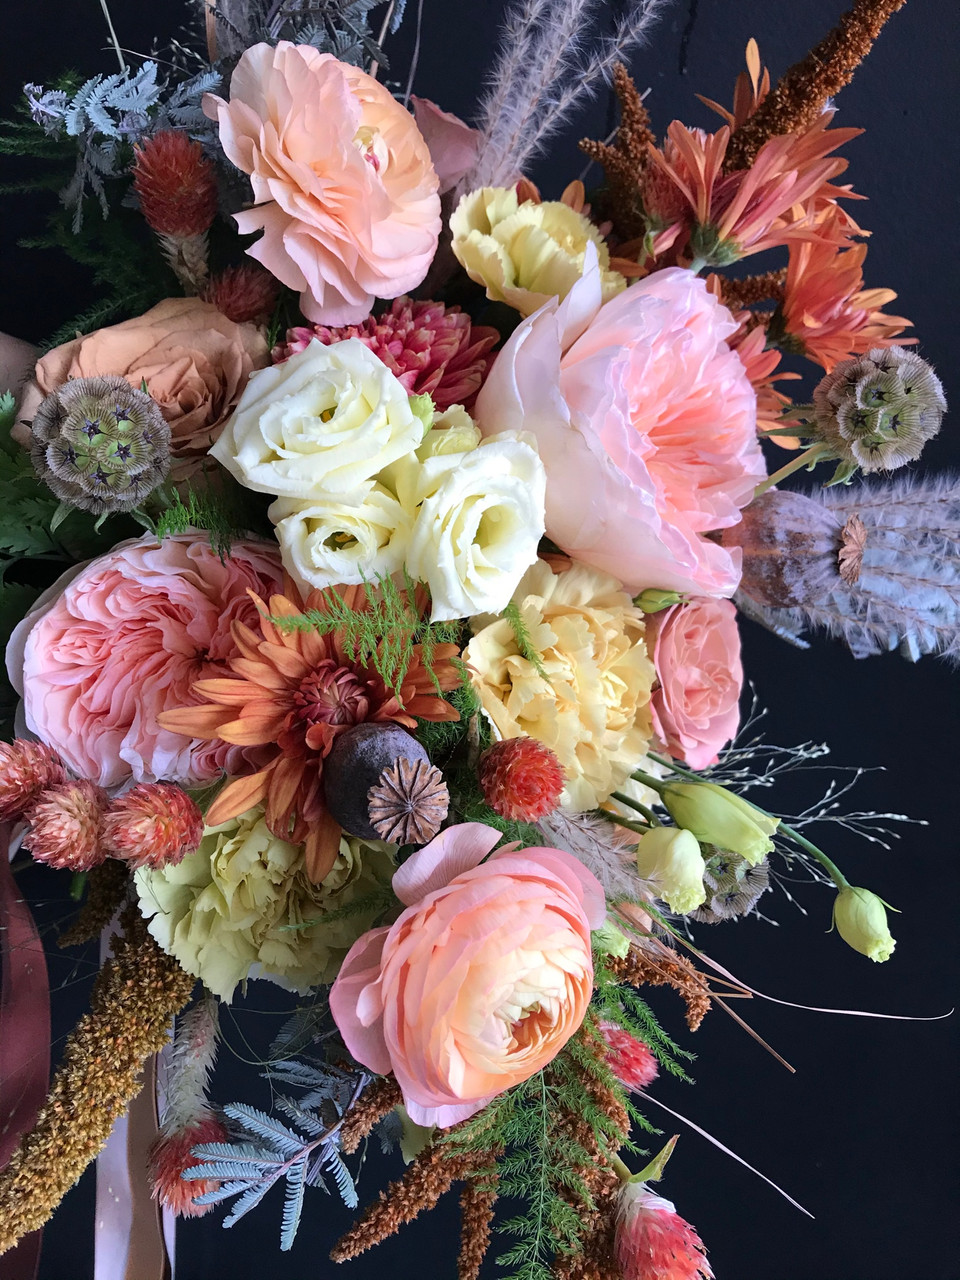 A summery peach explosion of a bouquet. Peach Garden Roses and Ranunculus take center stage surrounded by poppy pods, spray Mums and fuzzy grasses.